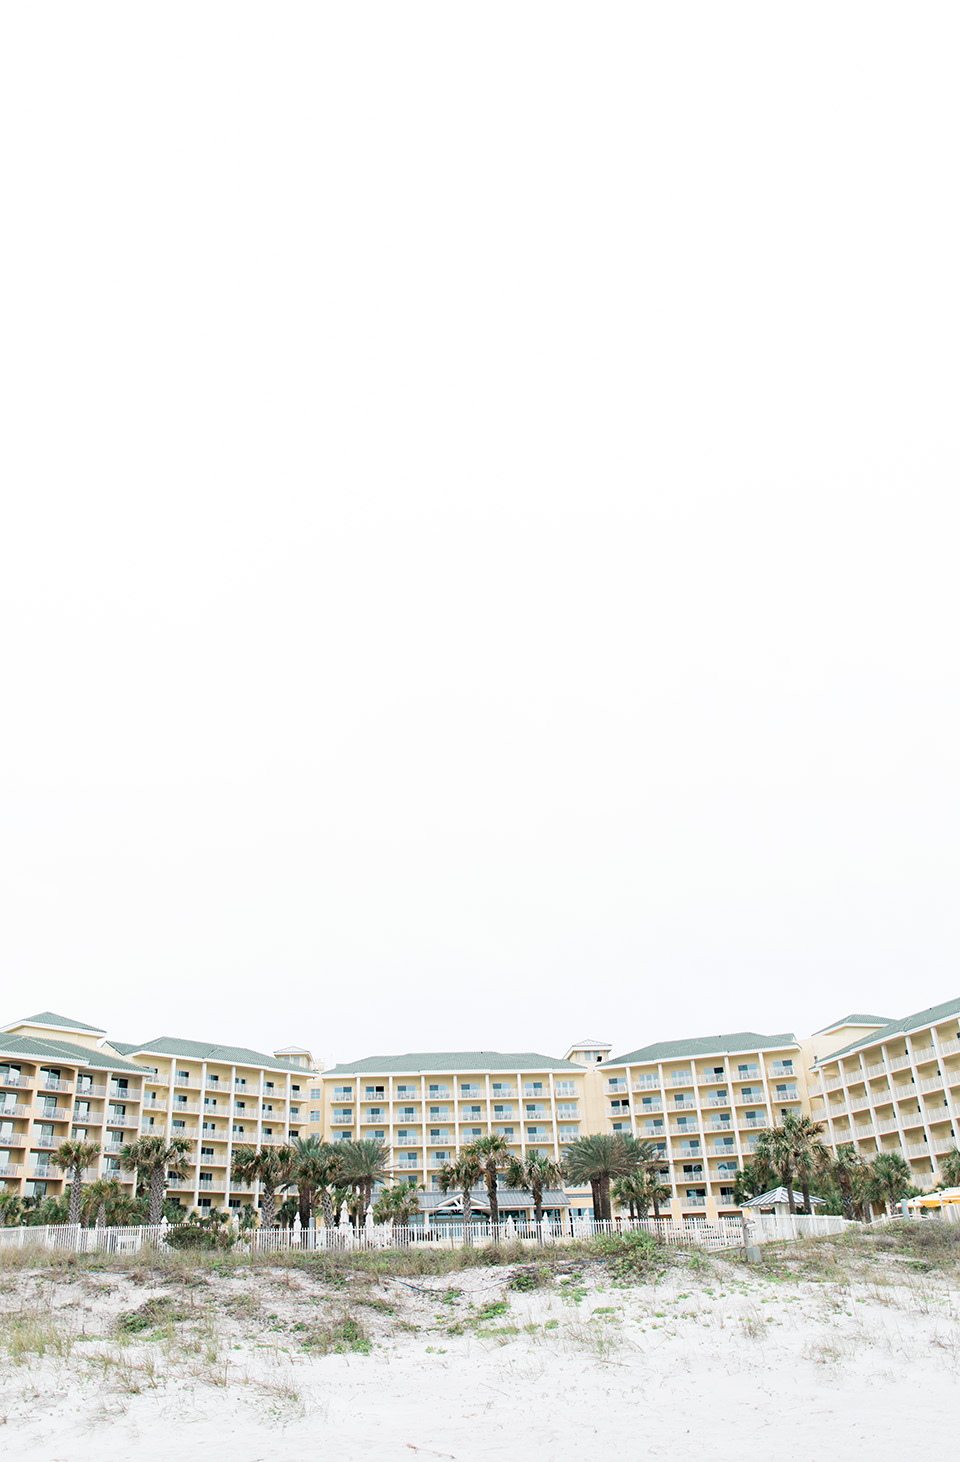 This is an image of the beachfront side of the Omni Amelia Island Plantation Resort. 